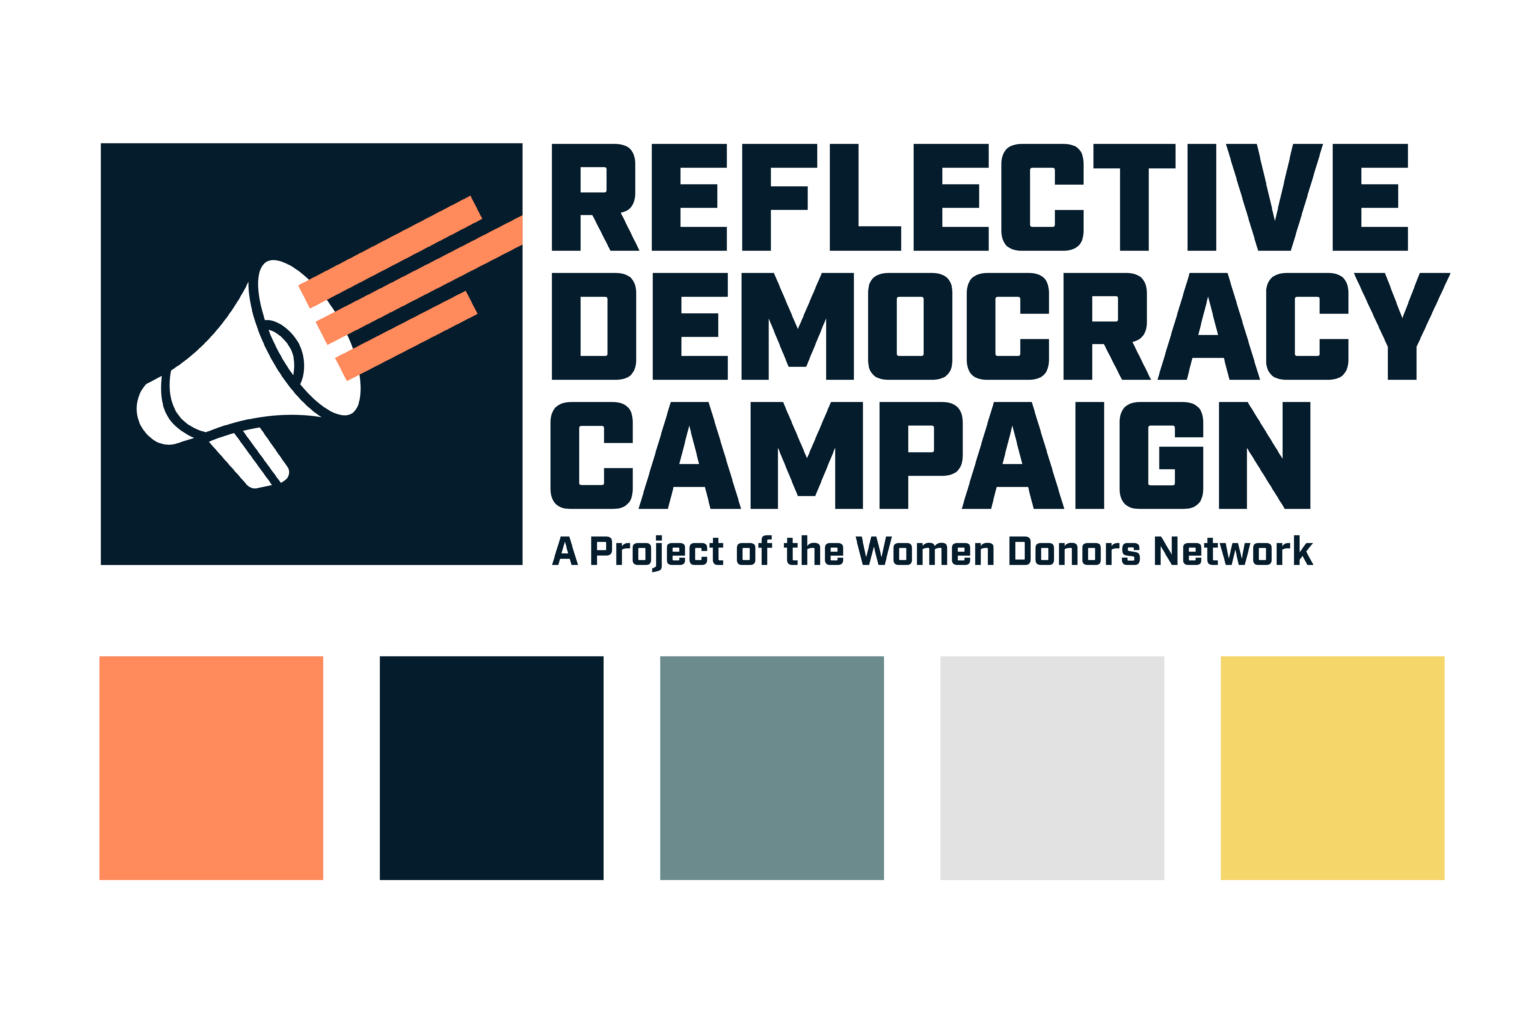 The Reflective Democracy Campaign logo and palette after our work